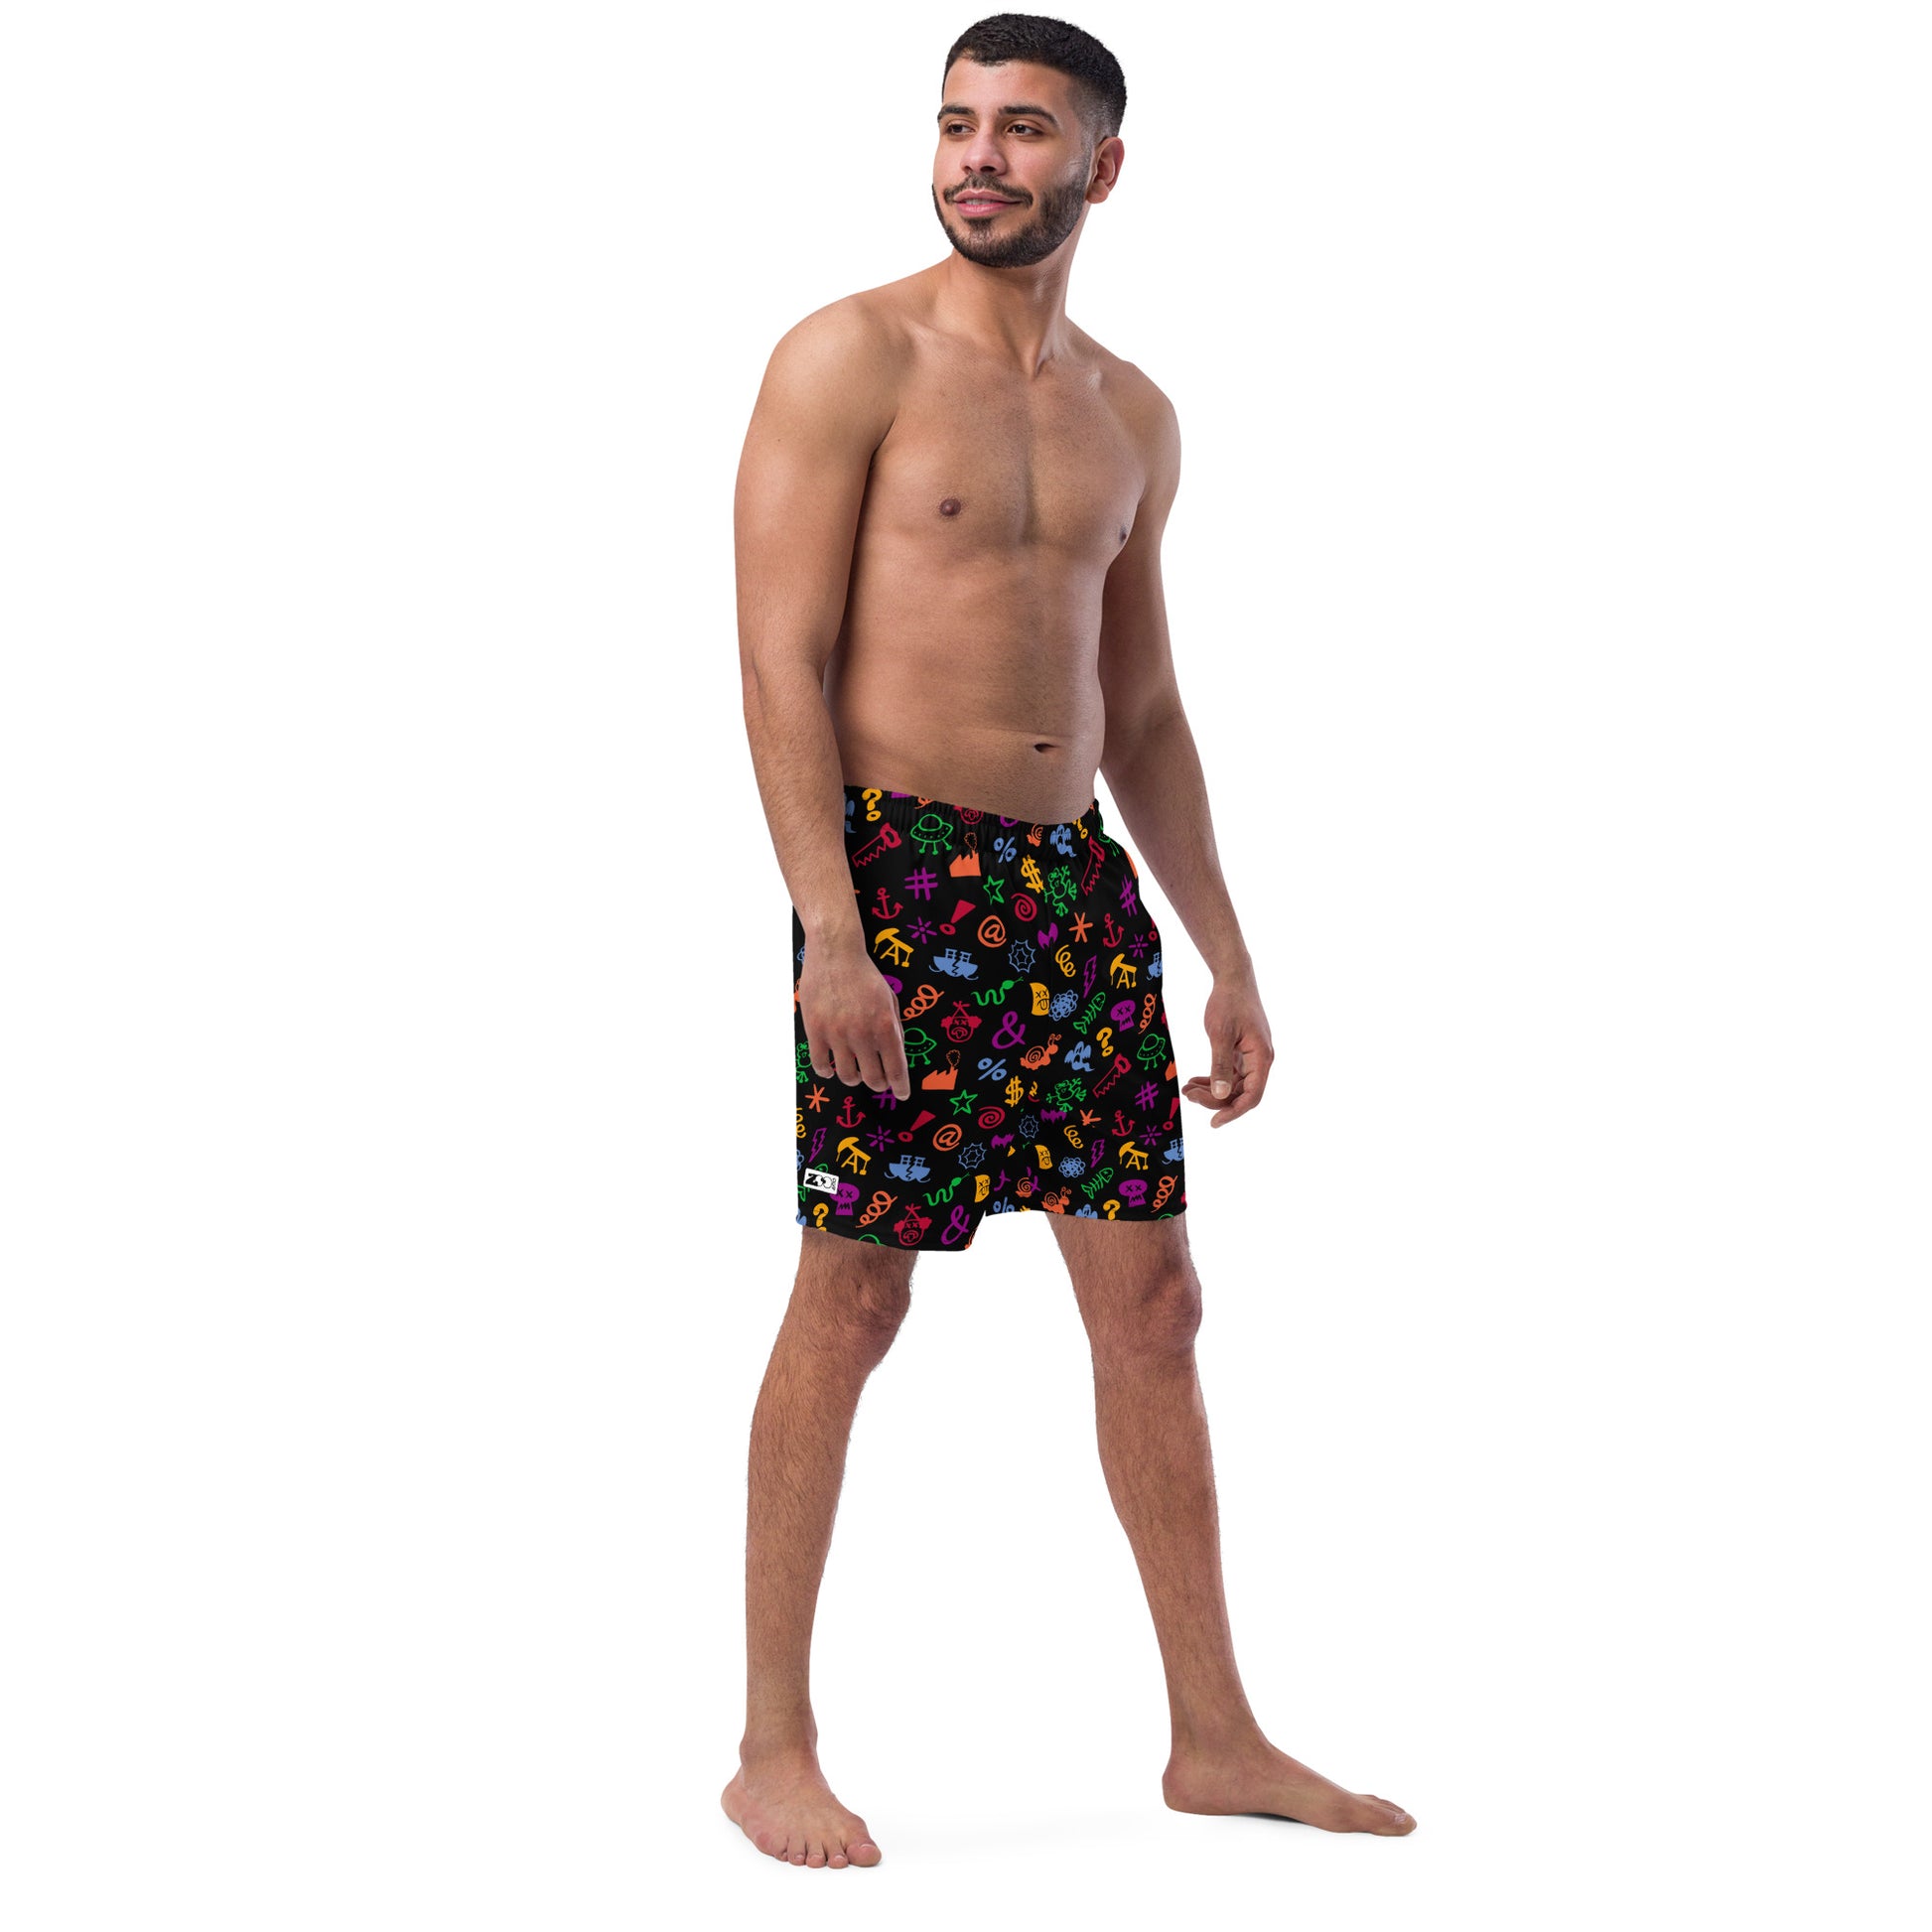 Wear these bad words Men's swim trunks, swear with confidence, keep your smile. Lifestyle